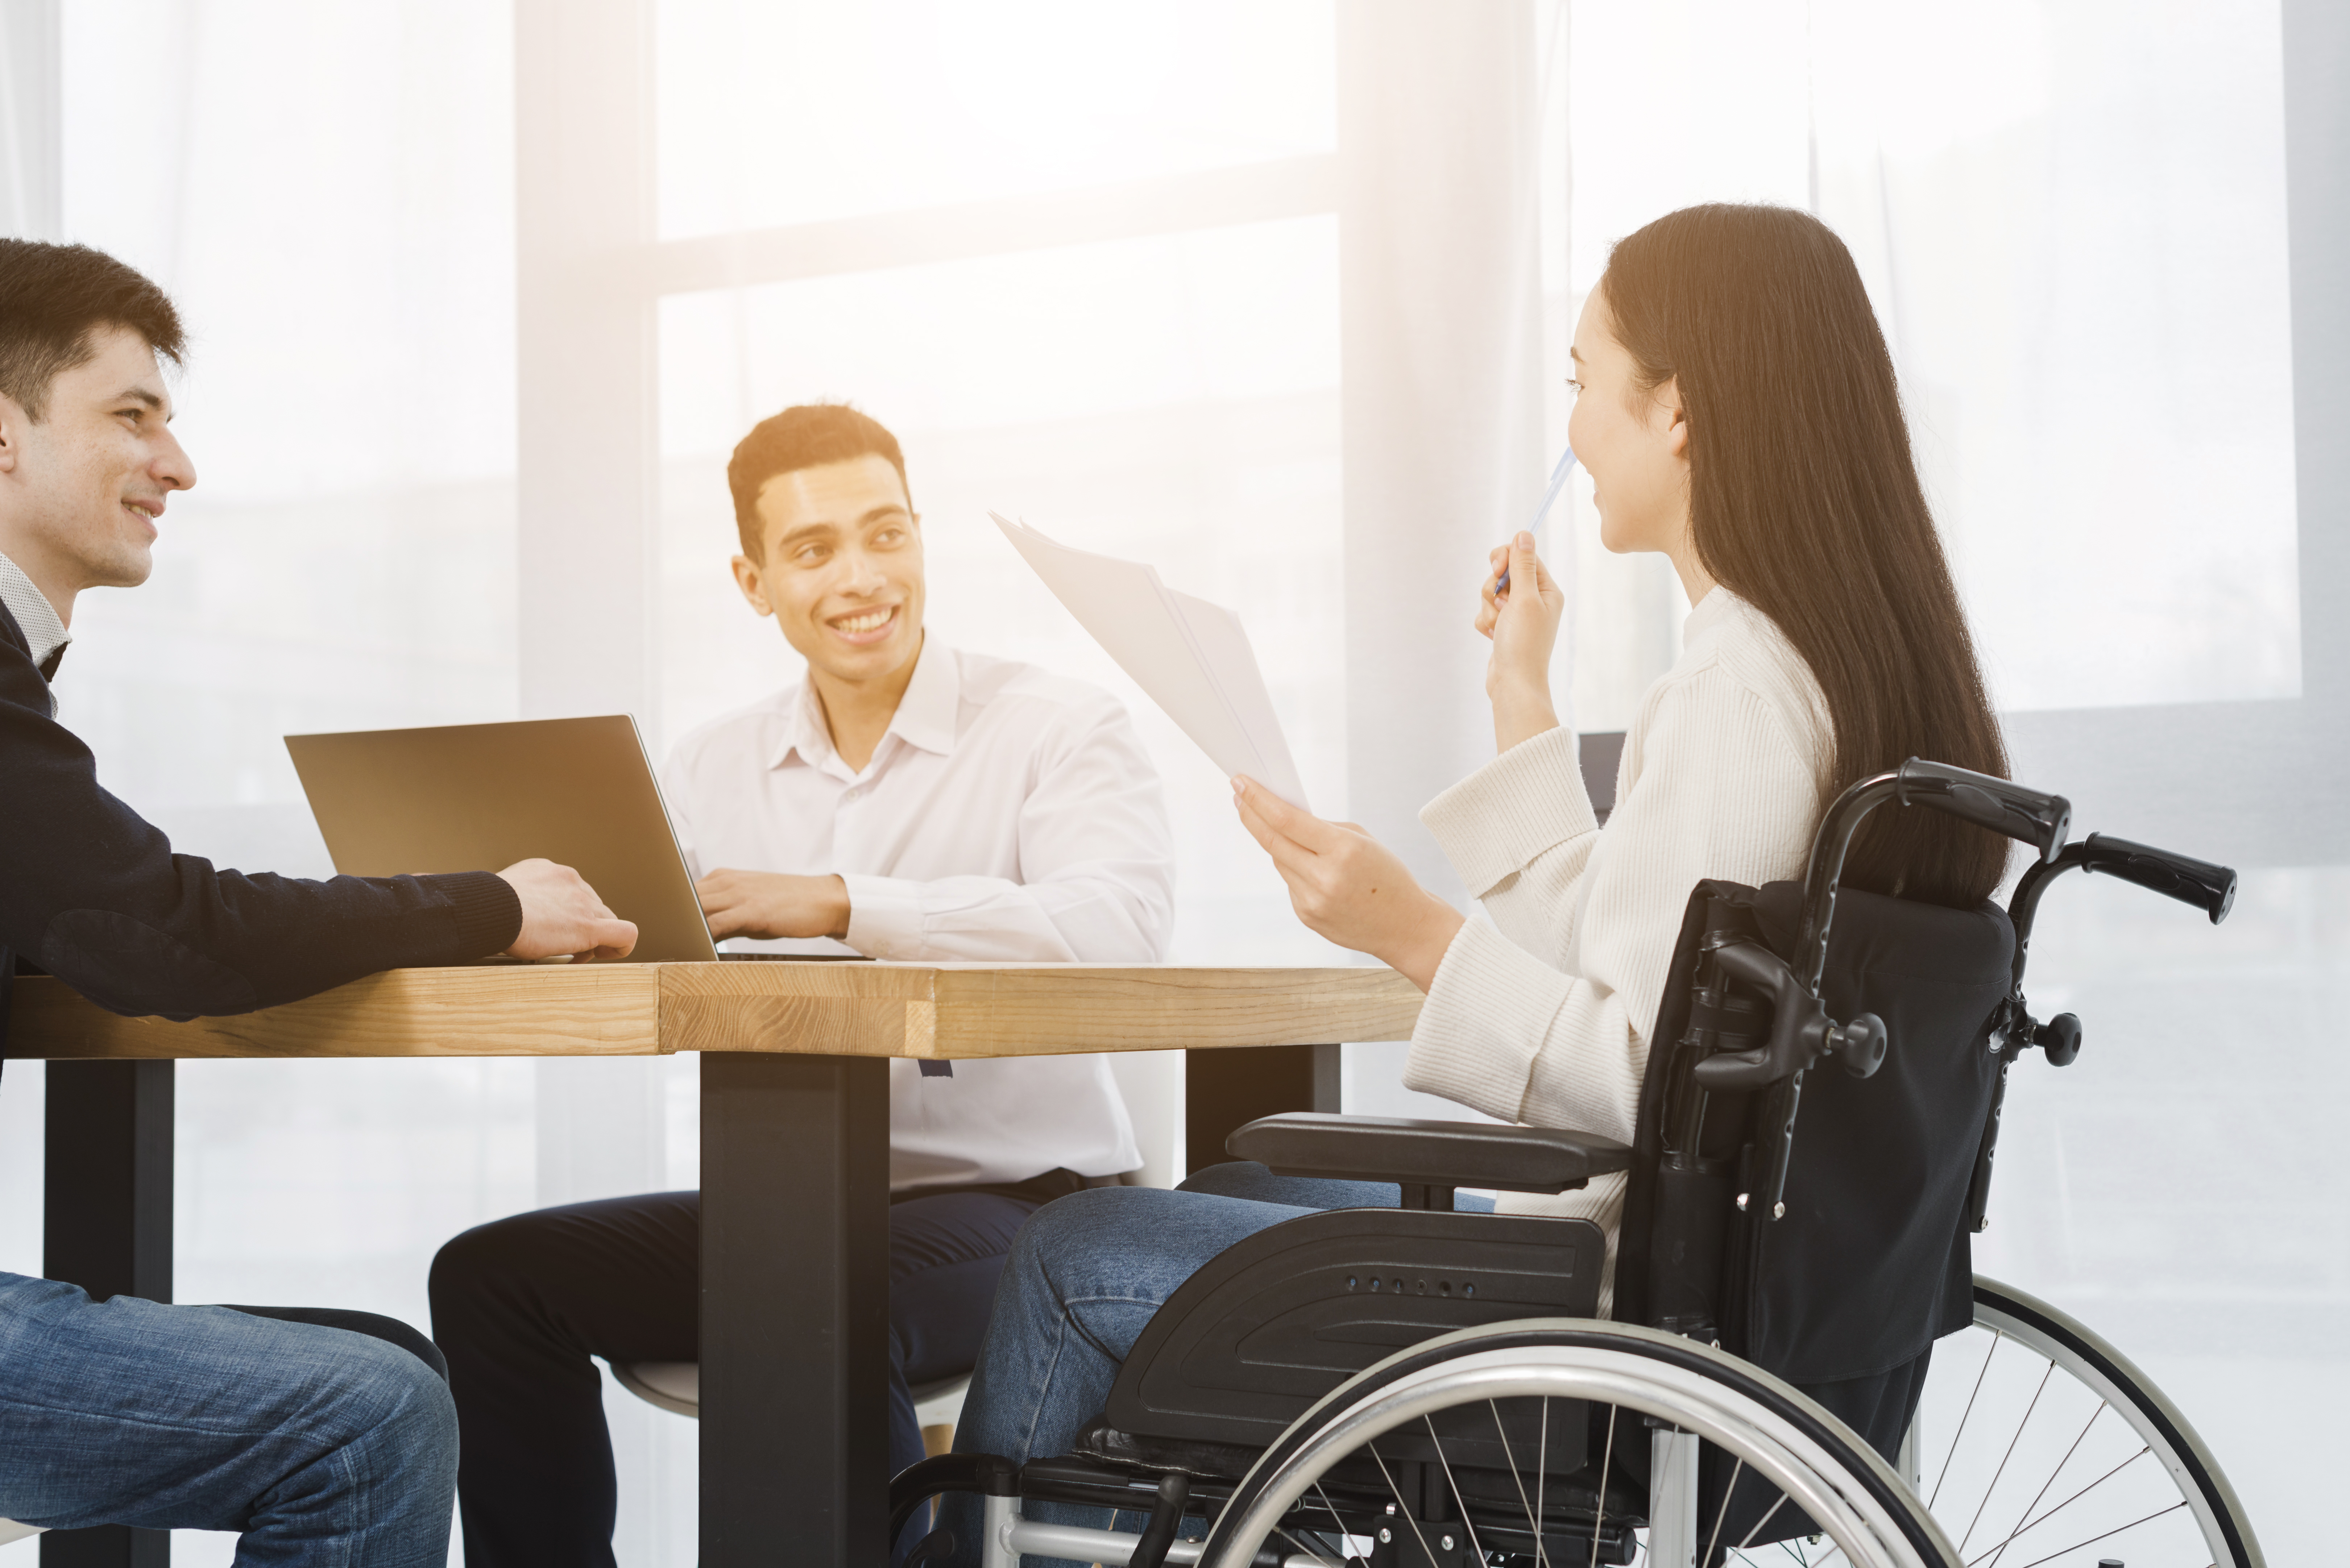 Team meeting, people with disabilities